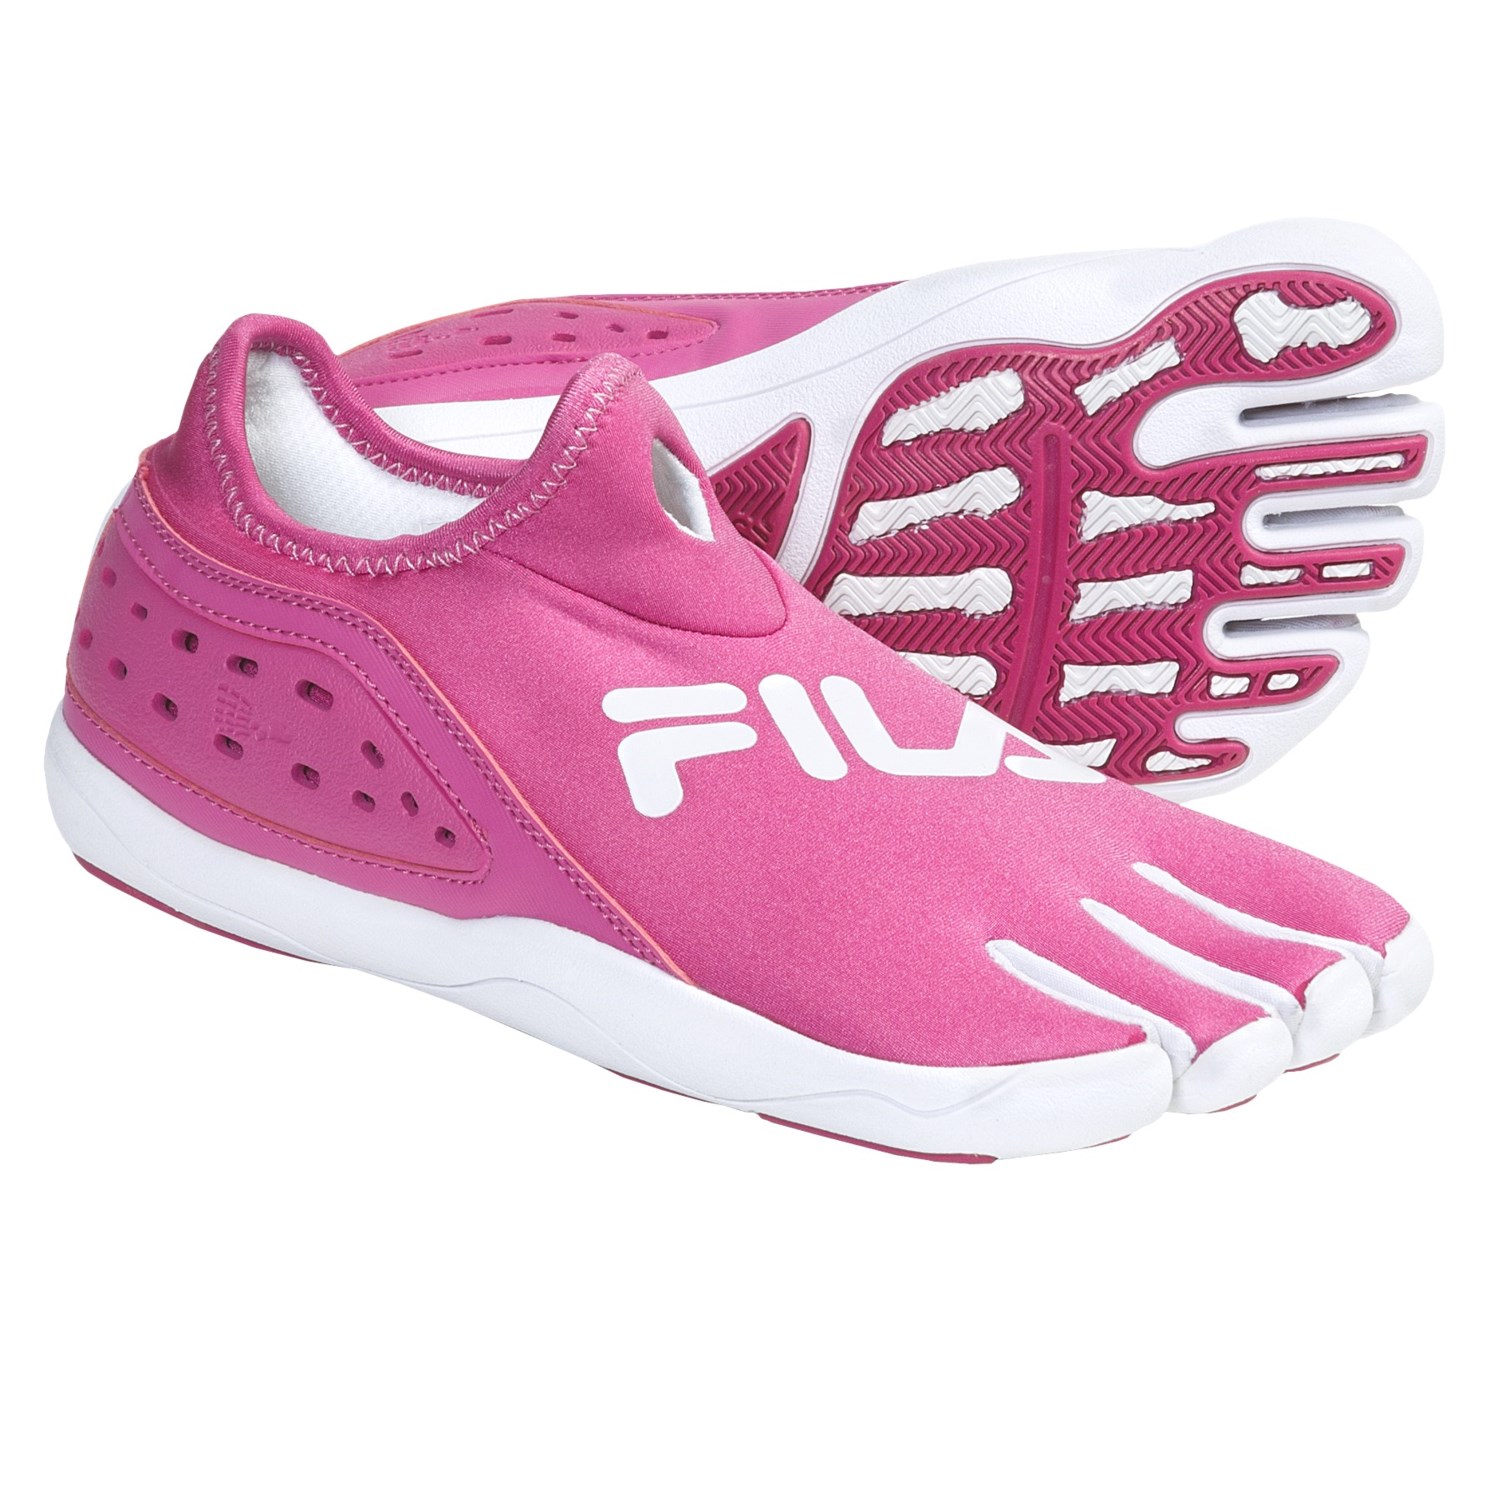 Fila SkeleToes Trifit Water Shoes (For Women) 5304D